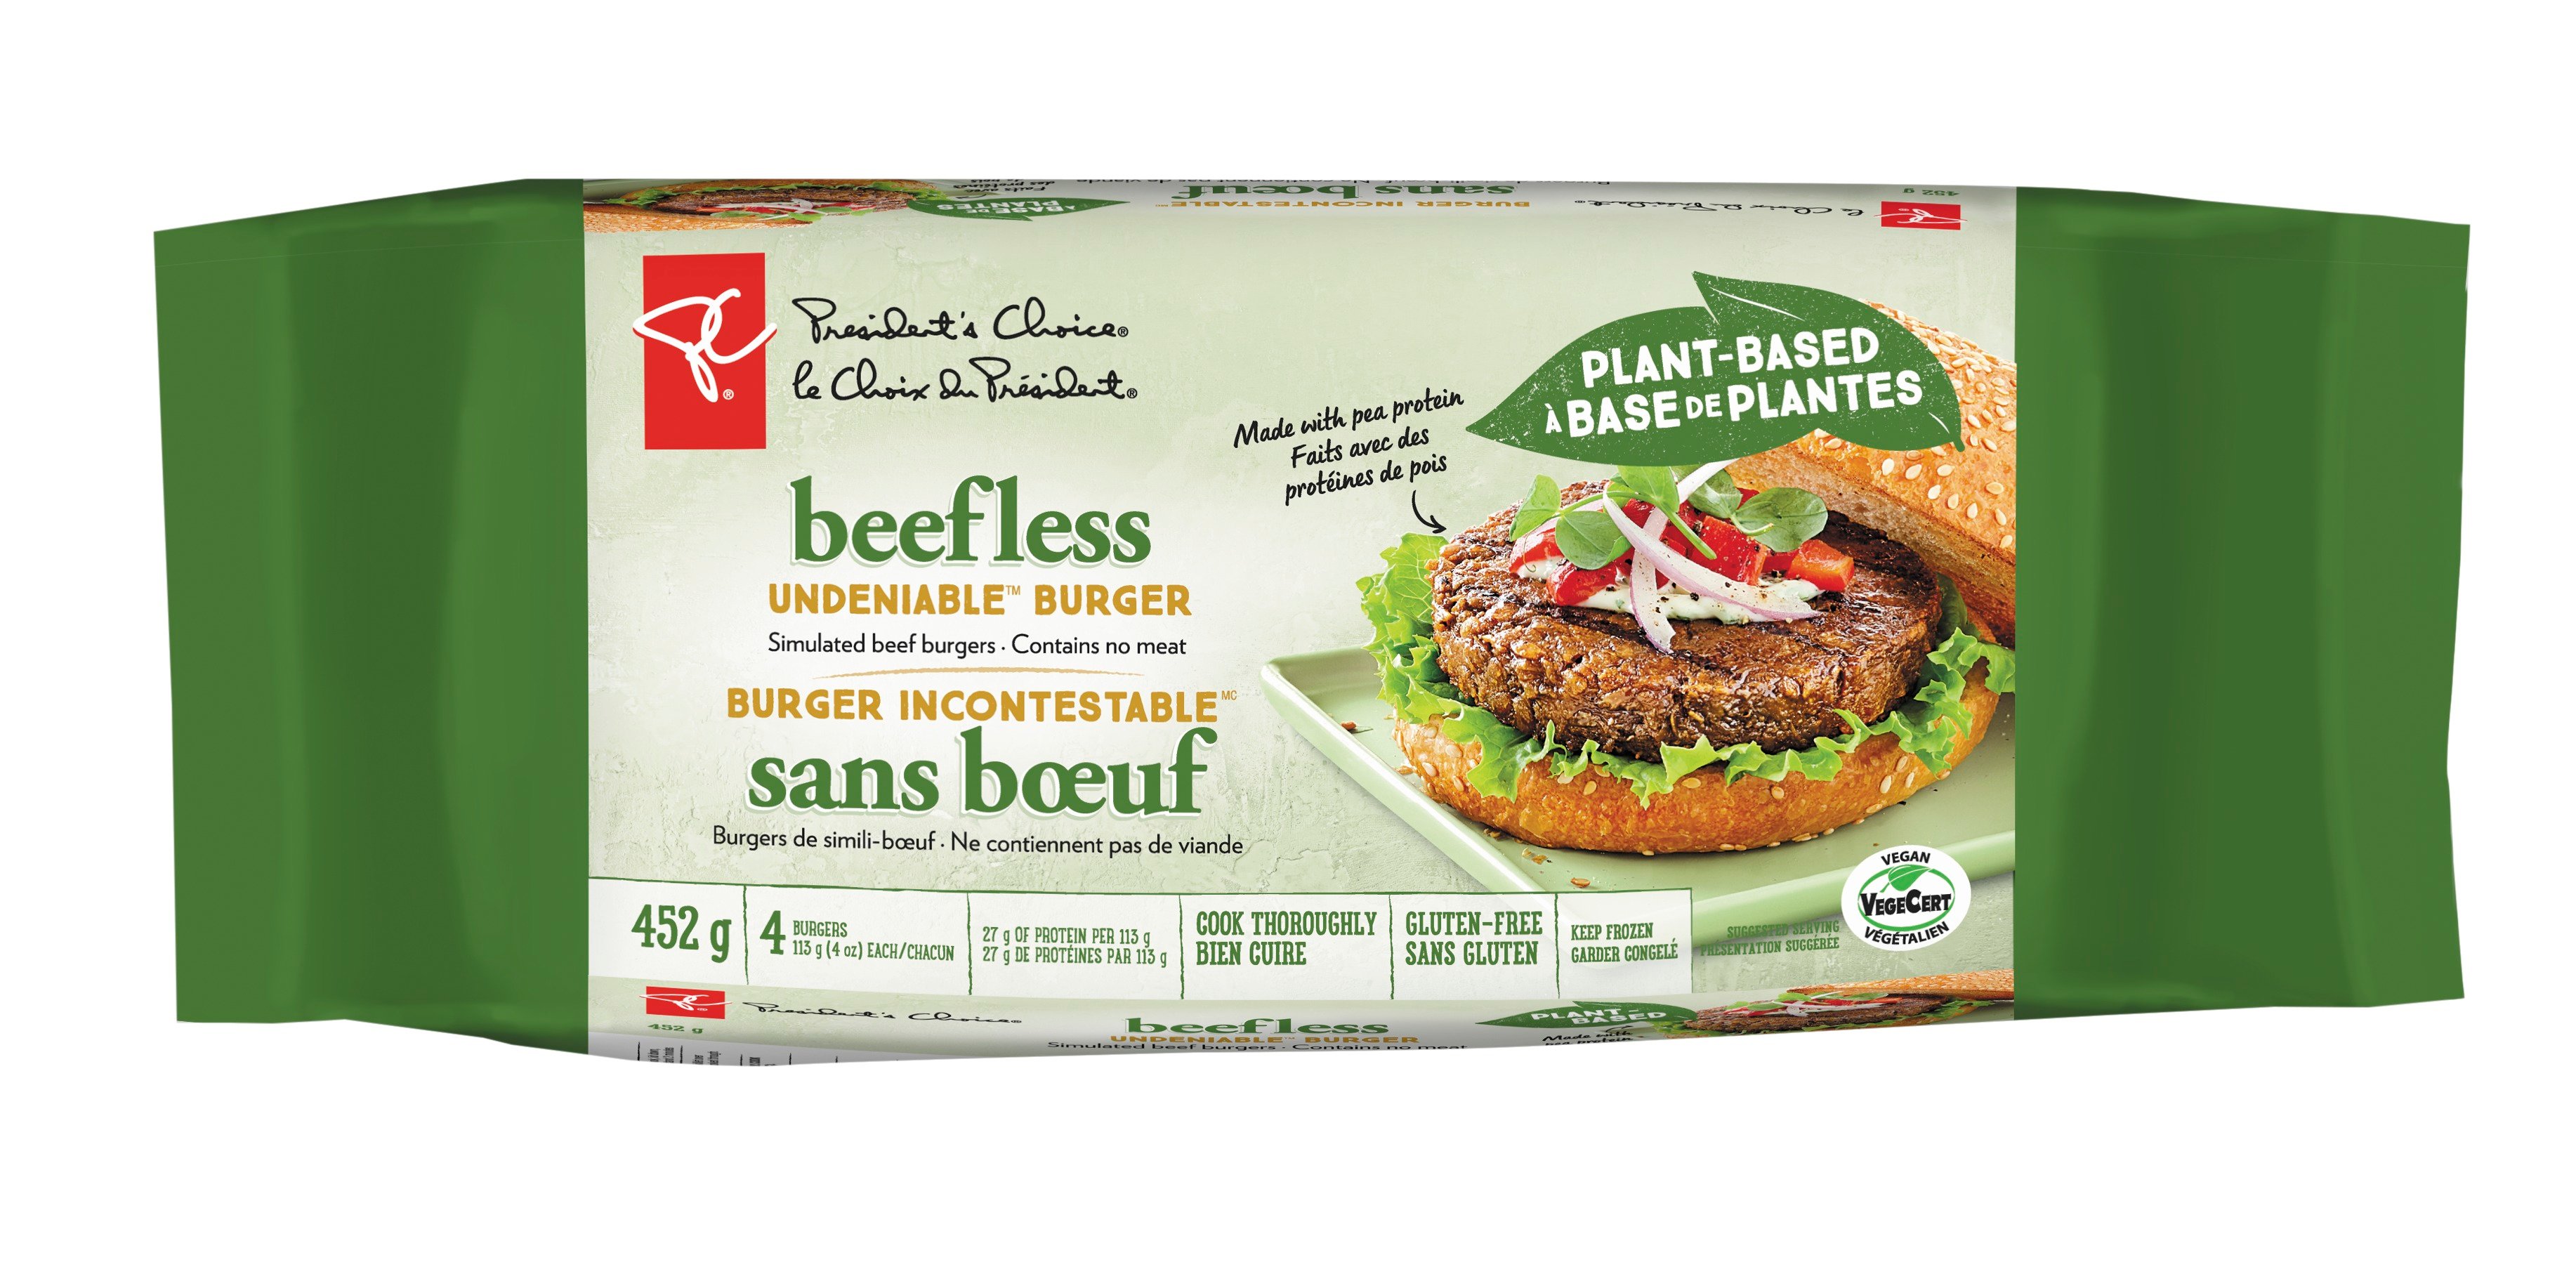 Packaging for the PC Undeniable Plant-Based Burger. It features the cooked and dressed burger against a light green background.